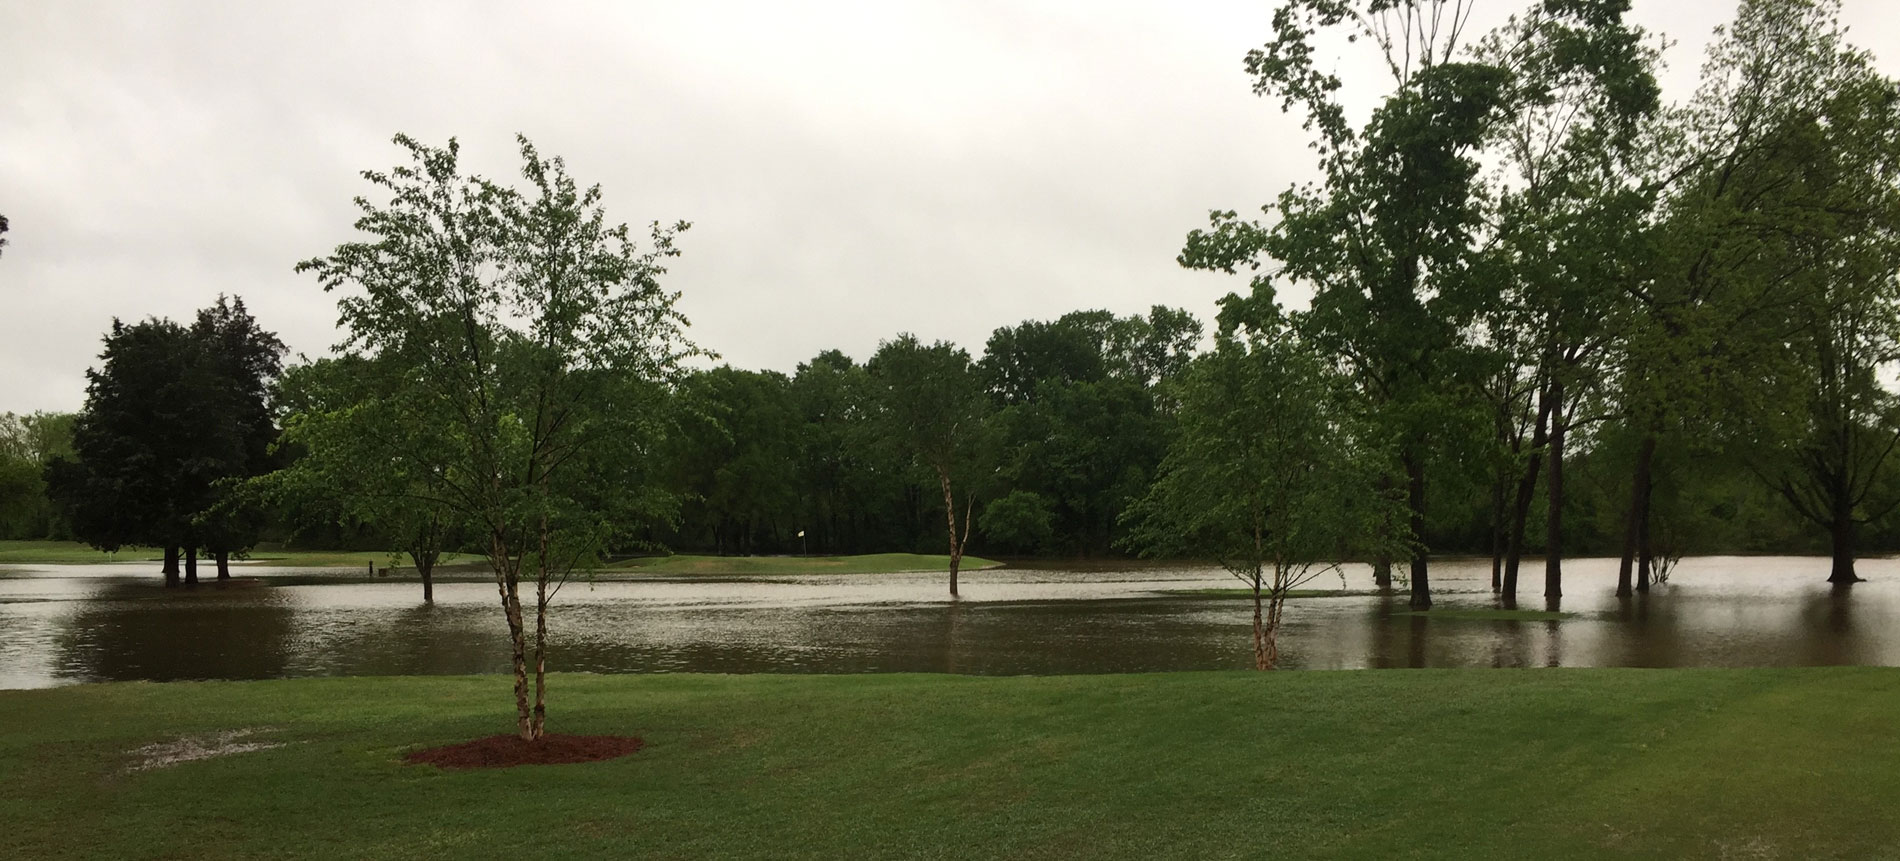 Second Round of SAC Men’s Golf Championship Washed Out  - Tournament Shortened to 27 Holes